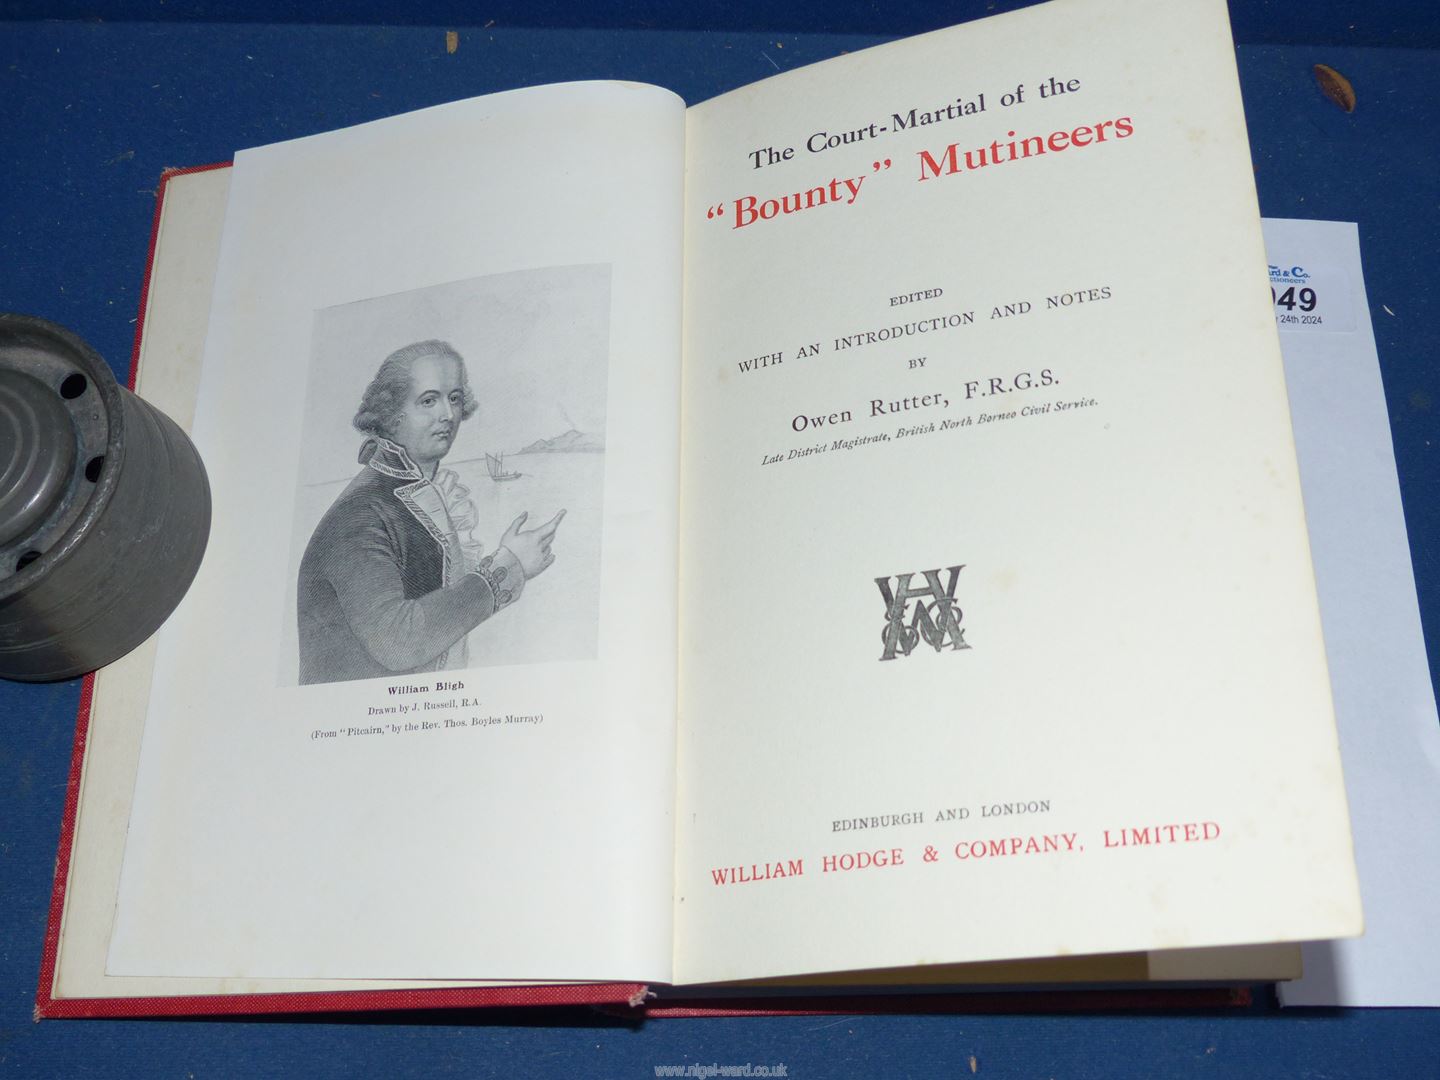 A first edition 1931 published by William Hodge & Company of The Court-Martial of the "Bounty" - Image 3 of 5